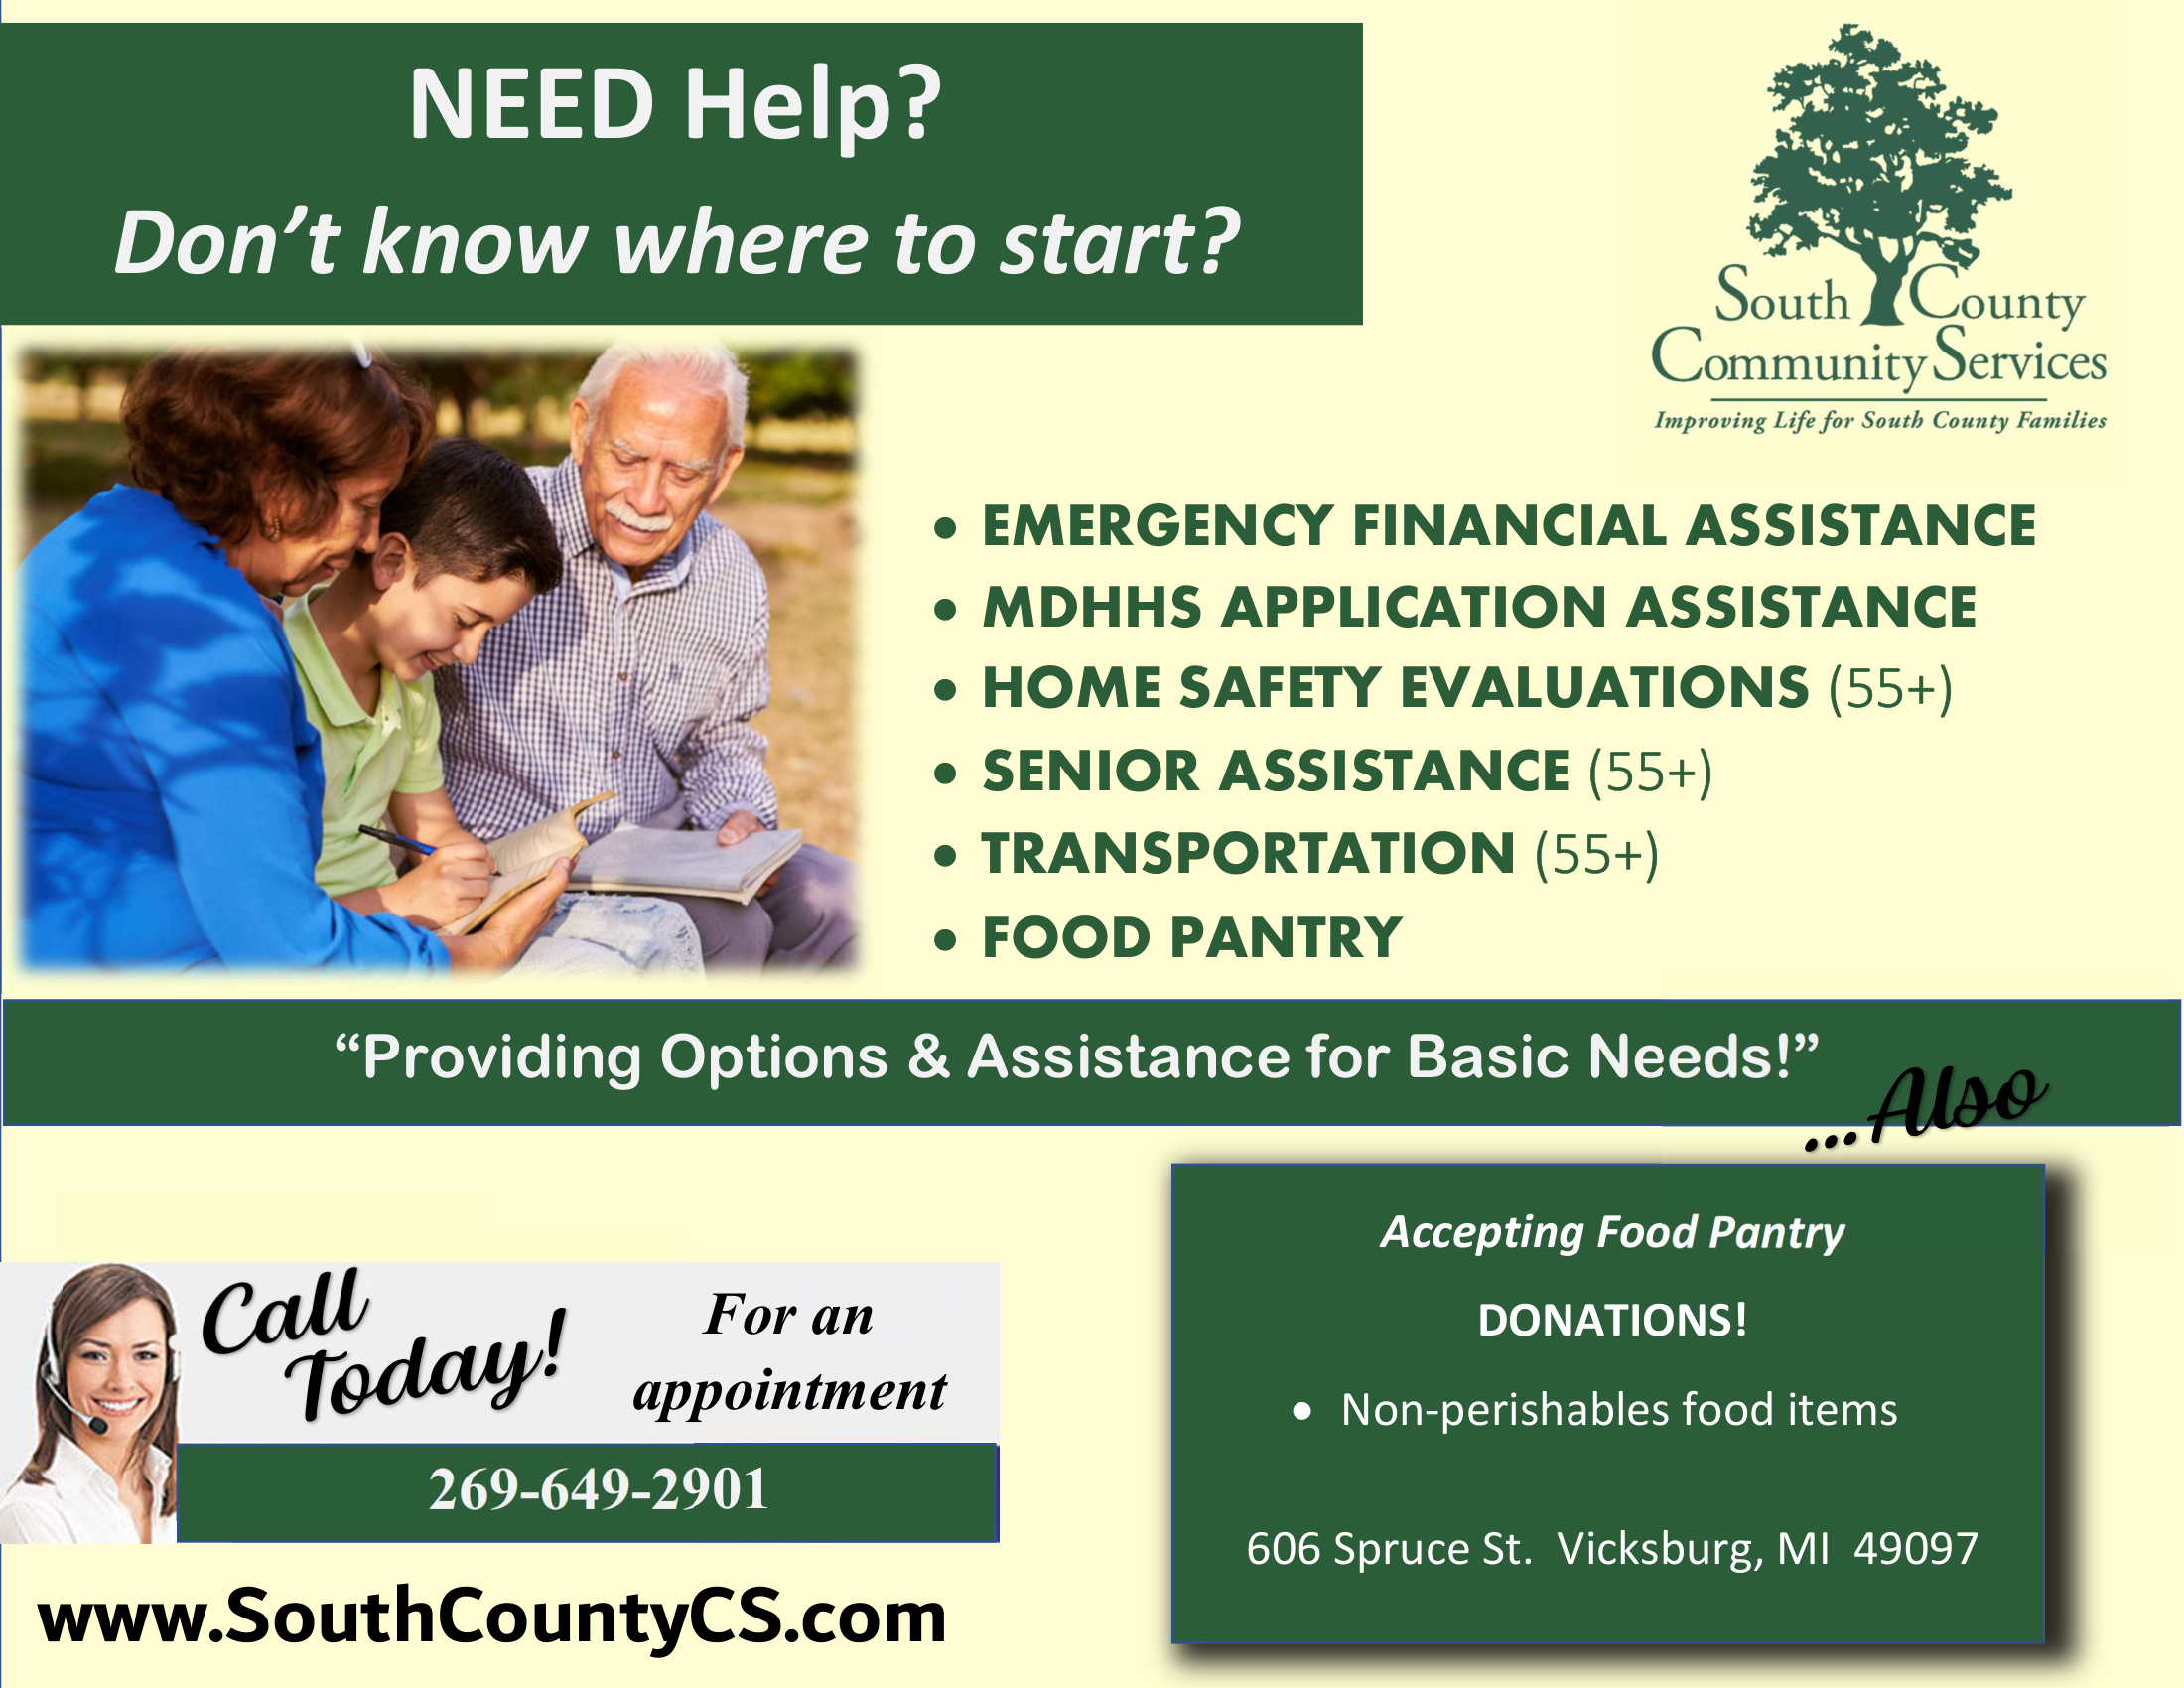 South County Community Services provides options and assistance for basic needs. Call 649-2901.